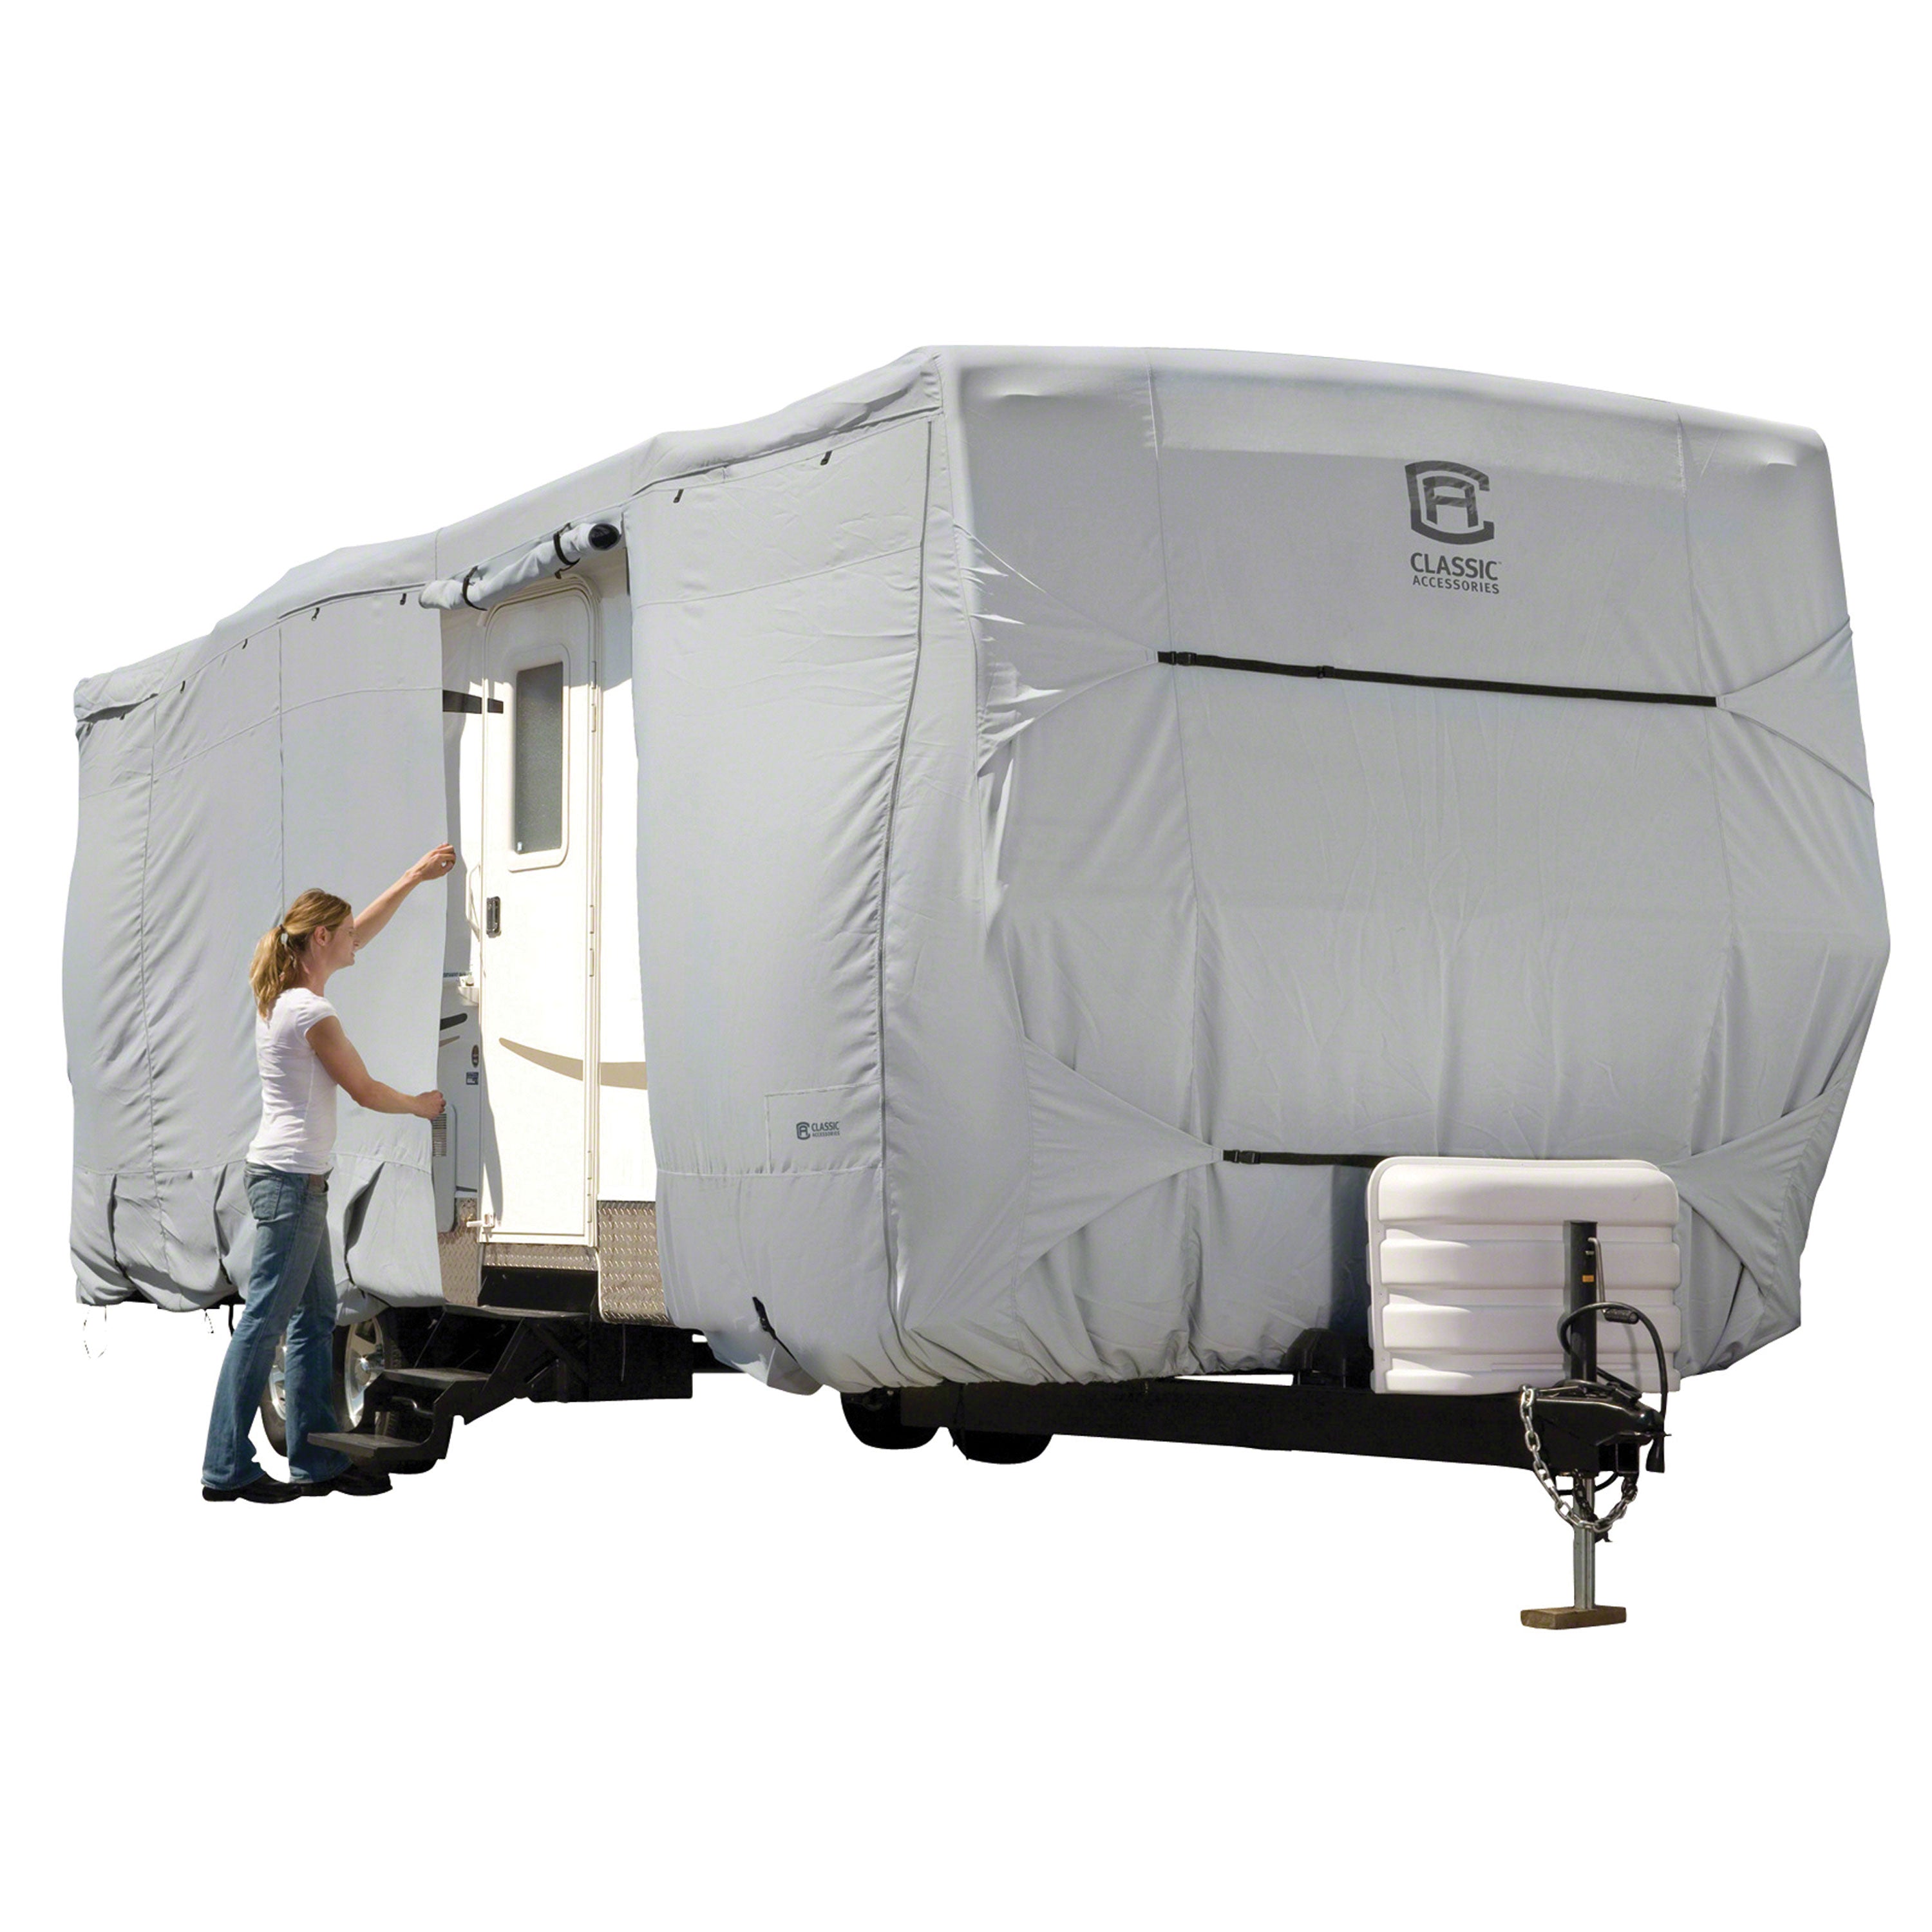 Classic Accessories 80-137-171001-00 Over Drive PermaPRO Travel Trailer Cover - 24' to 27' L x 118" H